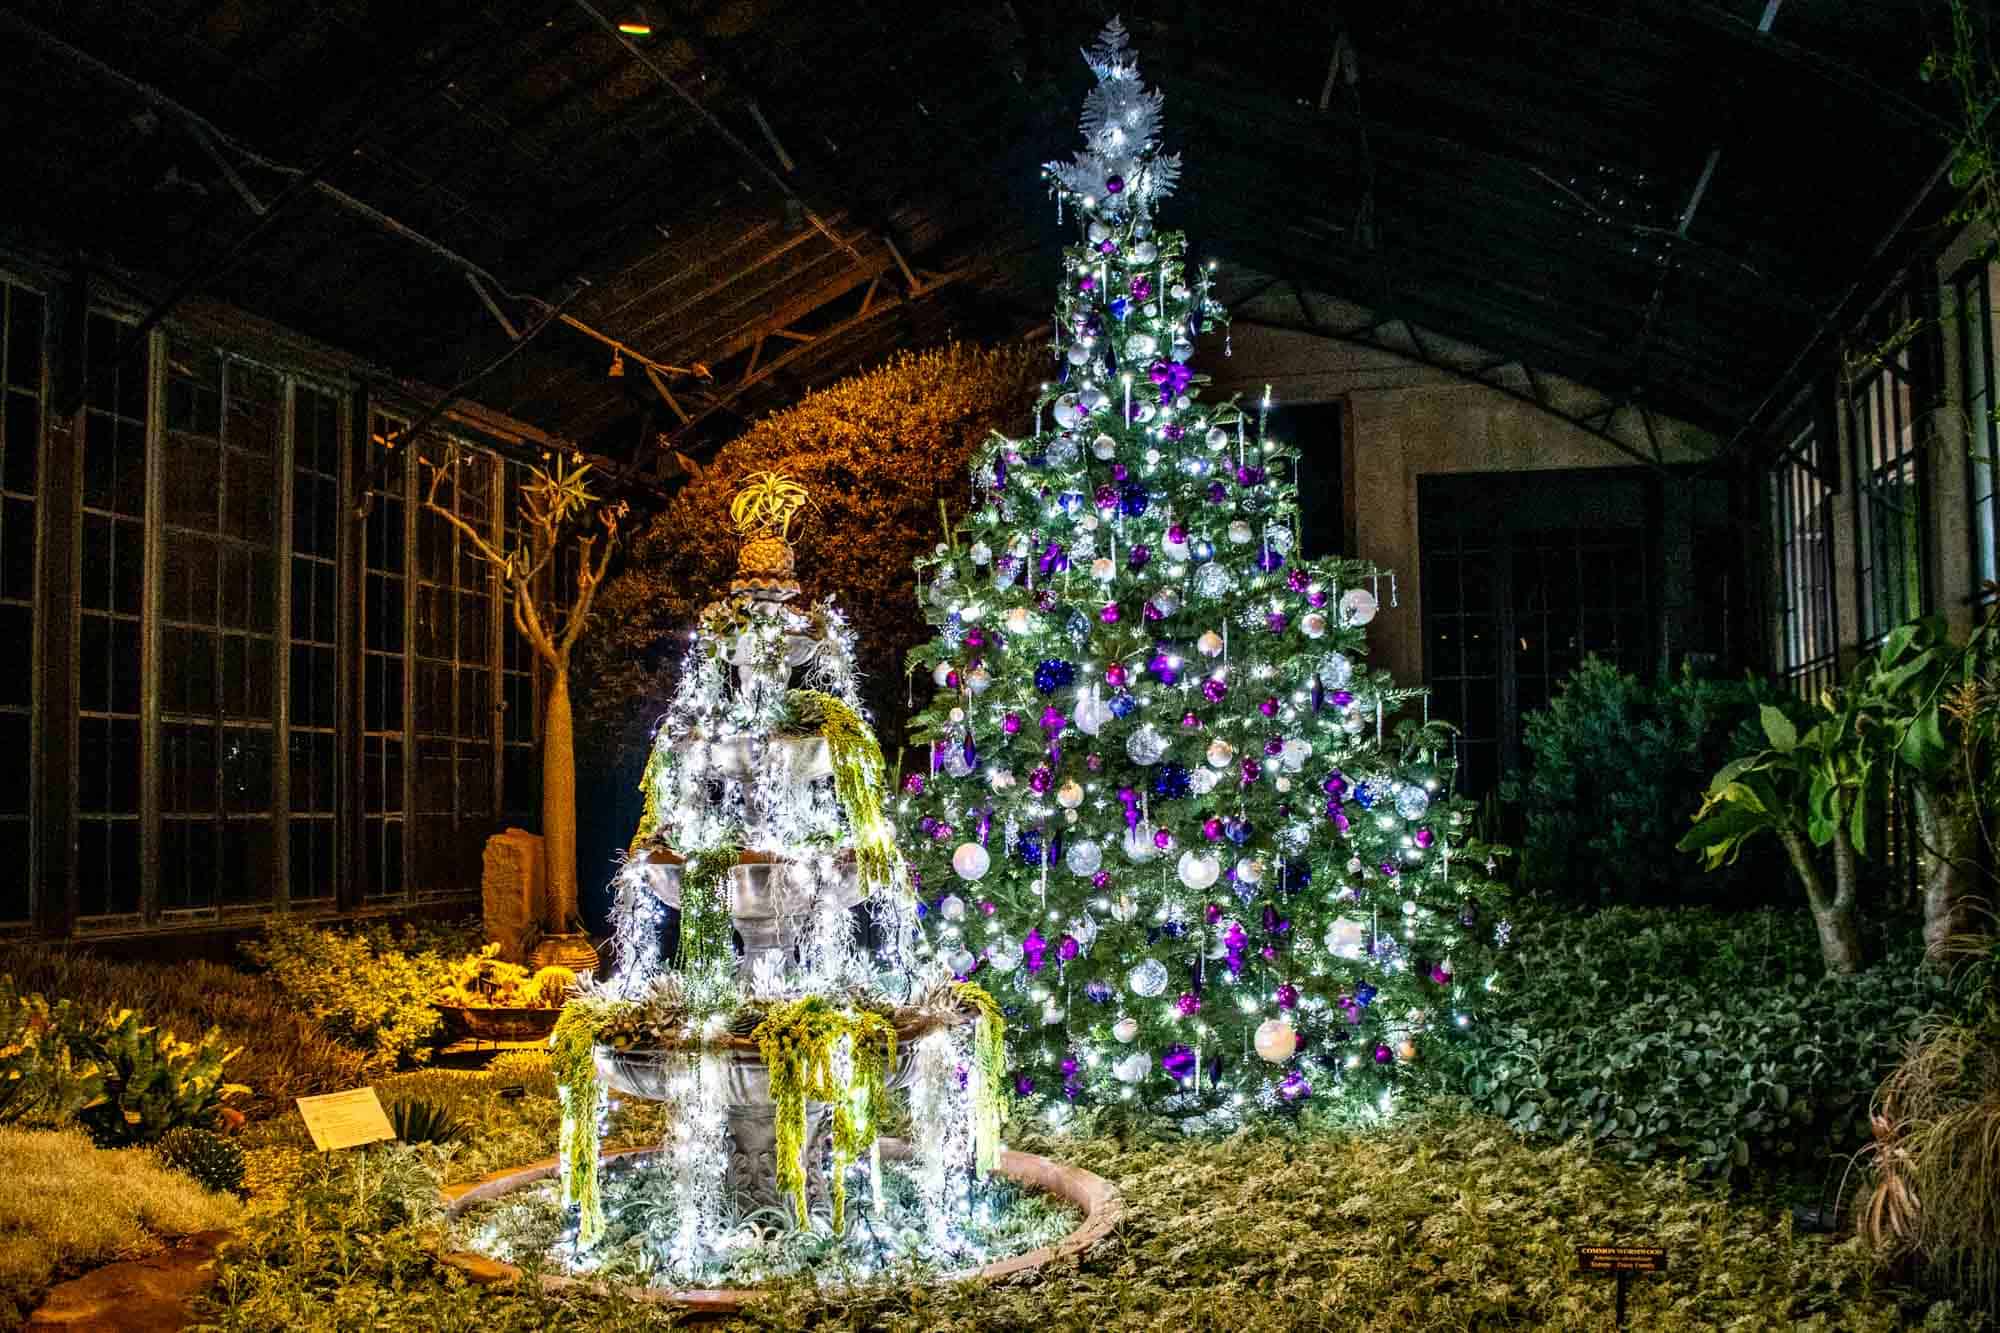 Christmas tree with purple and silver ornaments beside a fountain decorated with plants and silver strands